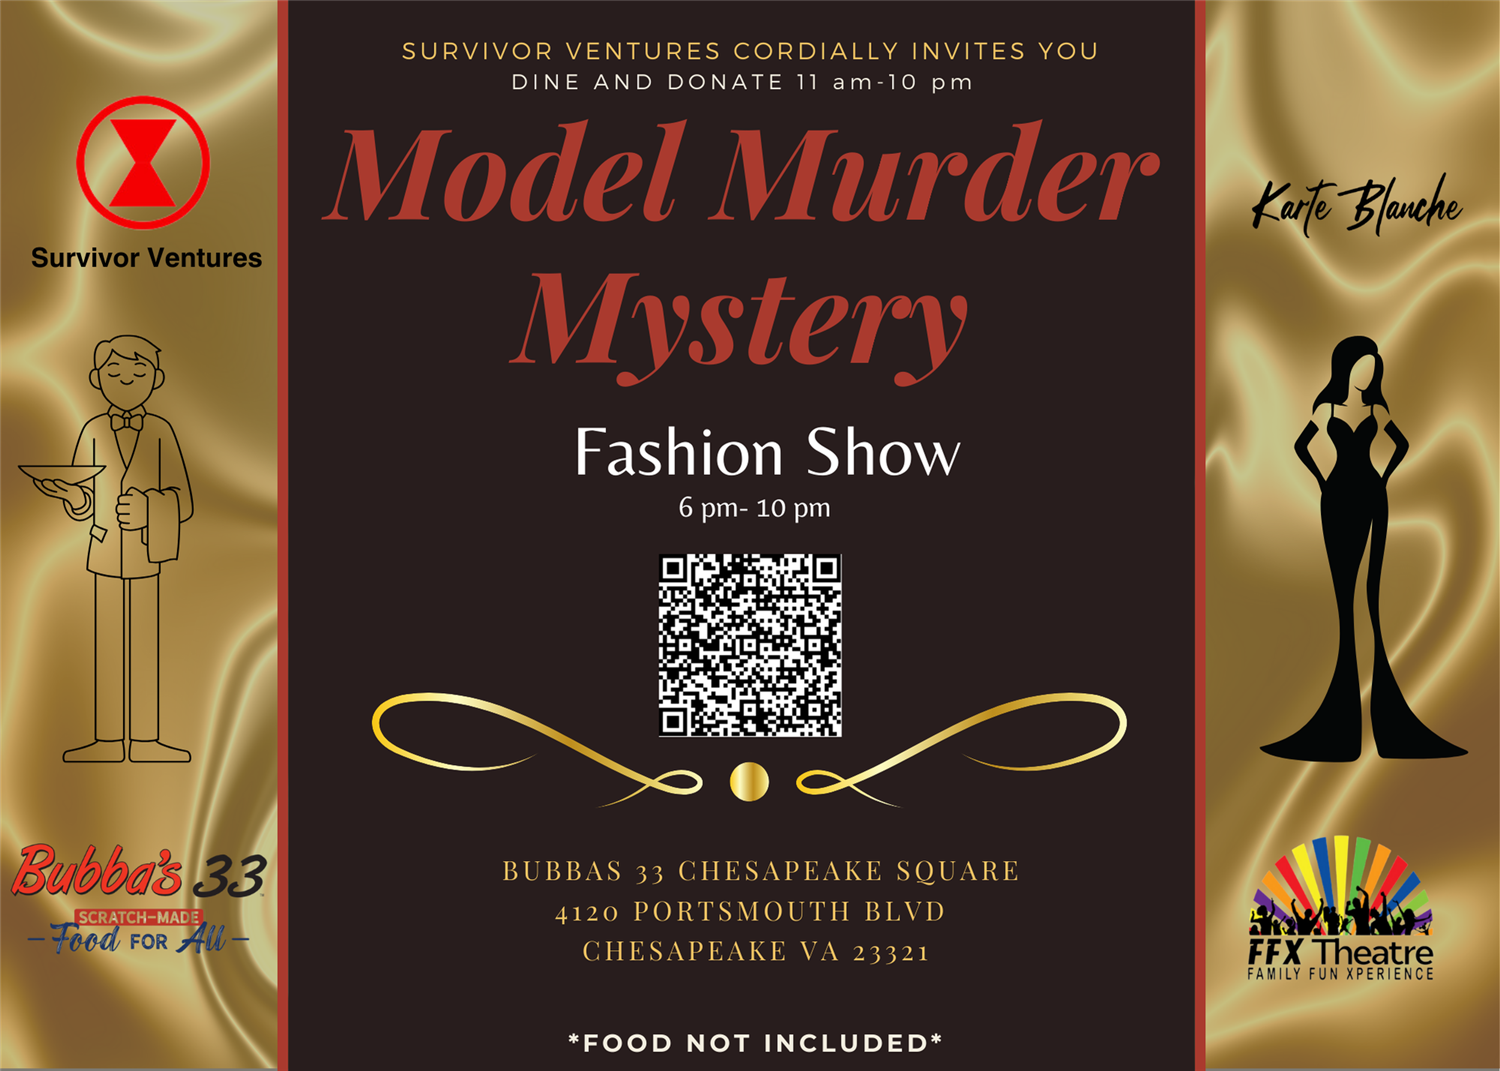 Dine and Donate: MODEL MURDER MYSTERY Benefit for Survivor Ventures at BUBBA'S 33 in Chesapeake (mystery hosted by FFX) on Jul 30, 18:00@Bubba's 33 - Chesapeake Square - Buy tickets and Get information on Family Fun Xperience tickets.ffxshow.org